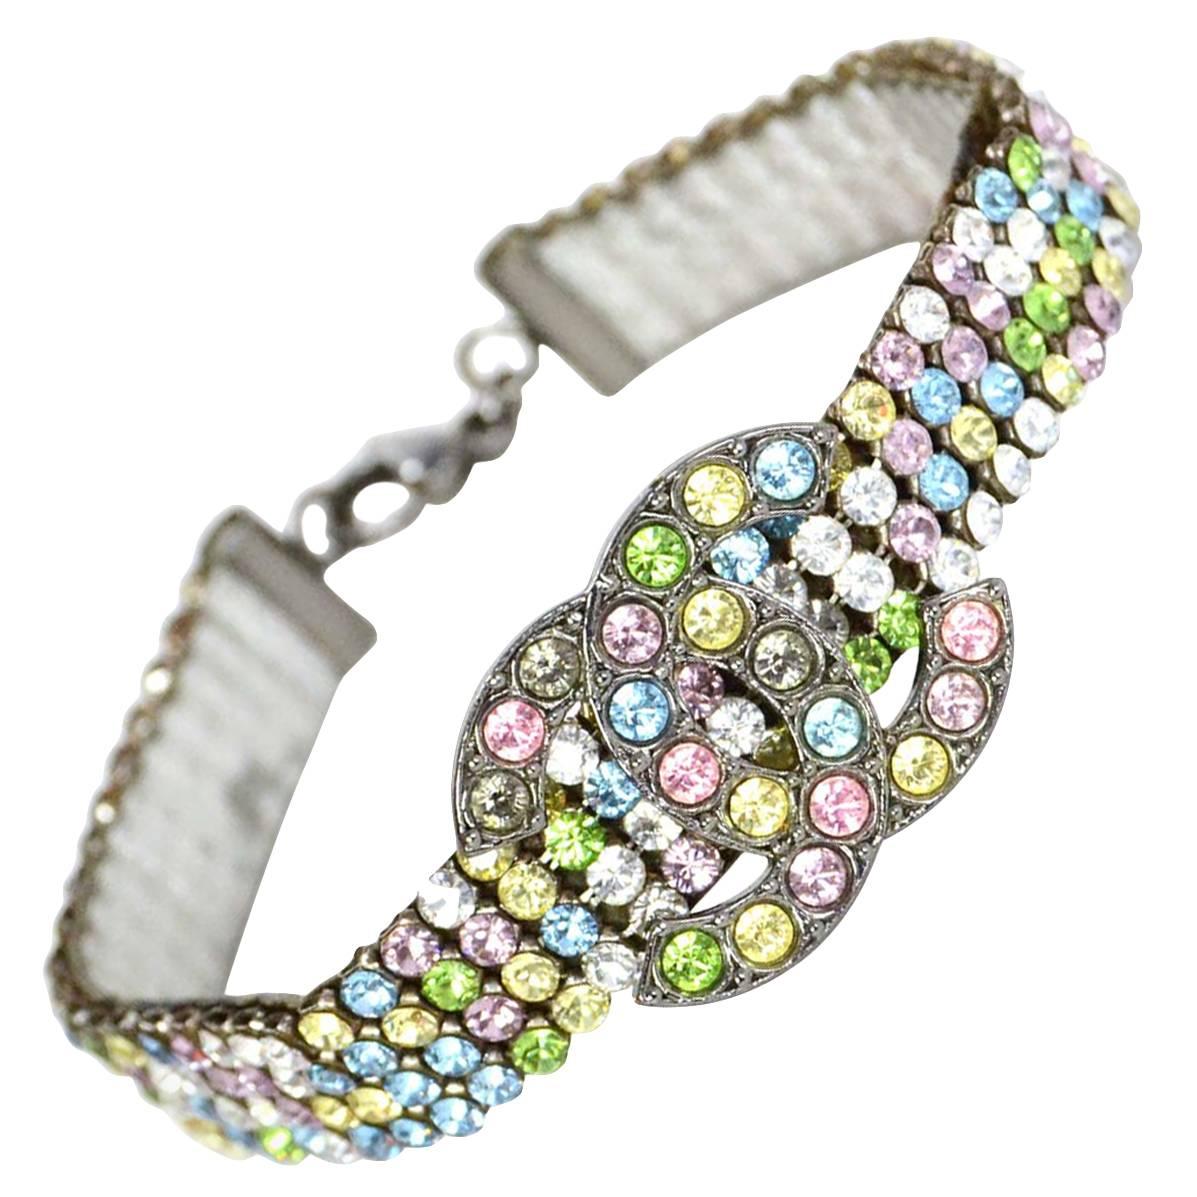 Chanel Multicolored Tutti Fruitti Crystal CC Bracelet with Dust Bag and Box